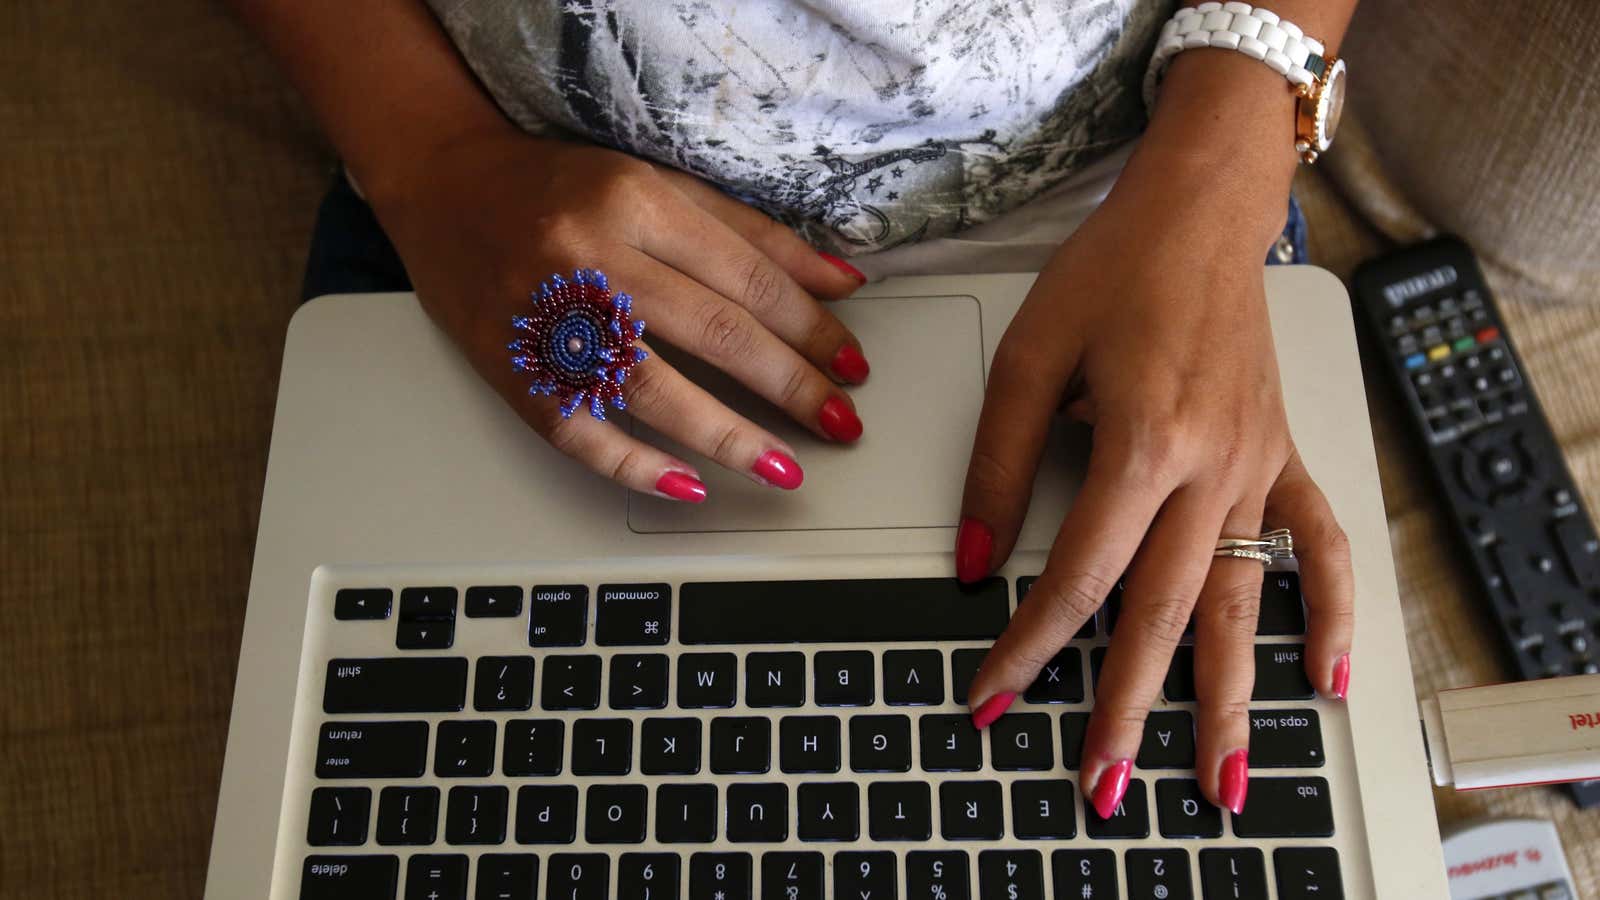 The hands of Malini Agarwal, blogger-in-chief of missmalini.com, are pictured as she blogs from her living room in Mumbai, January 22, 2013. Agarwal, 35, exemplifies…